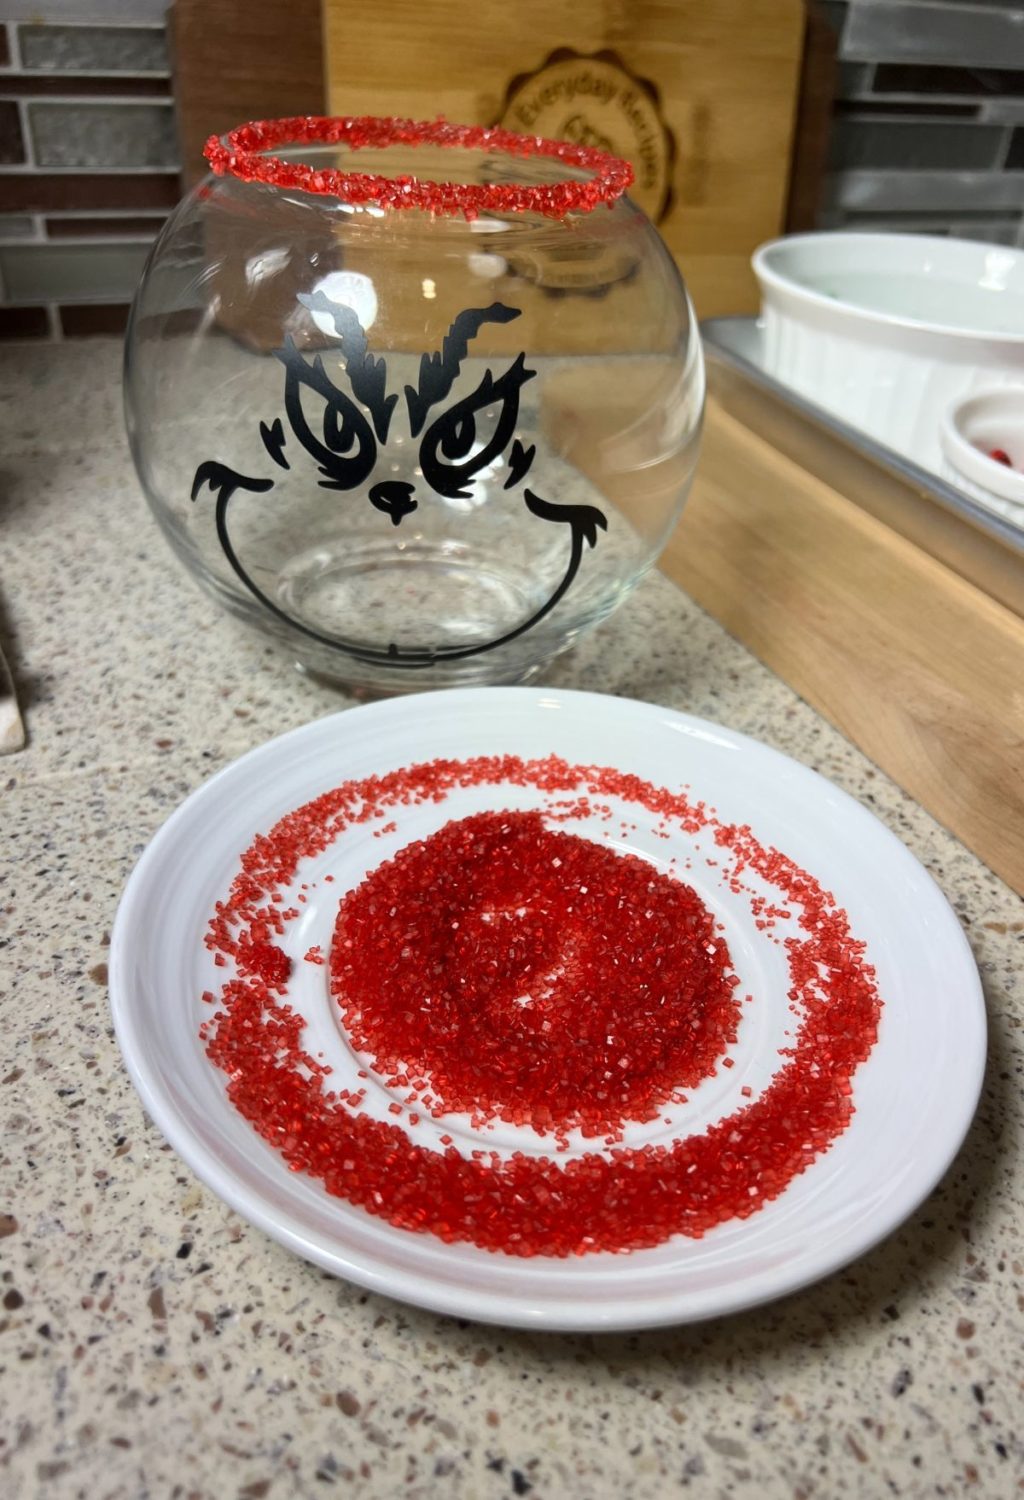 A plate with red sprinkles on it next to a bowl.